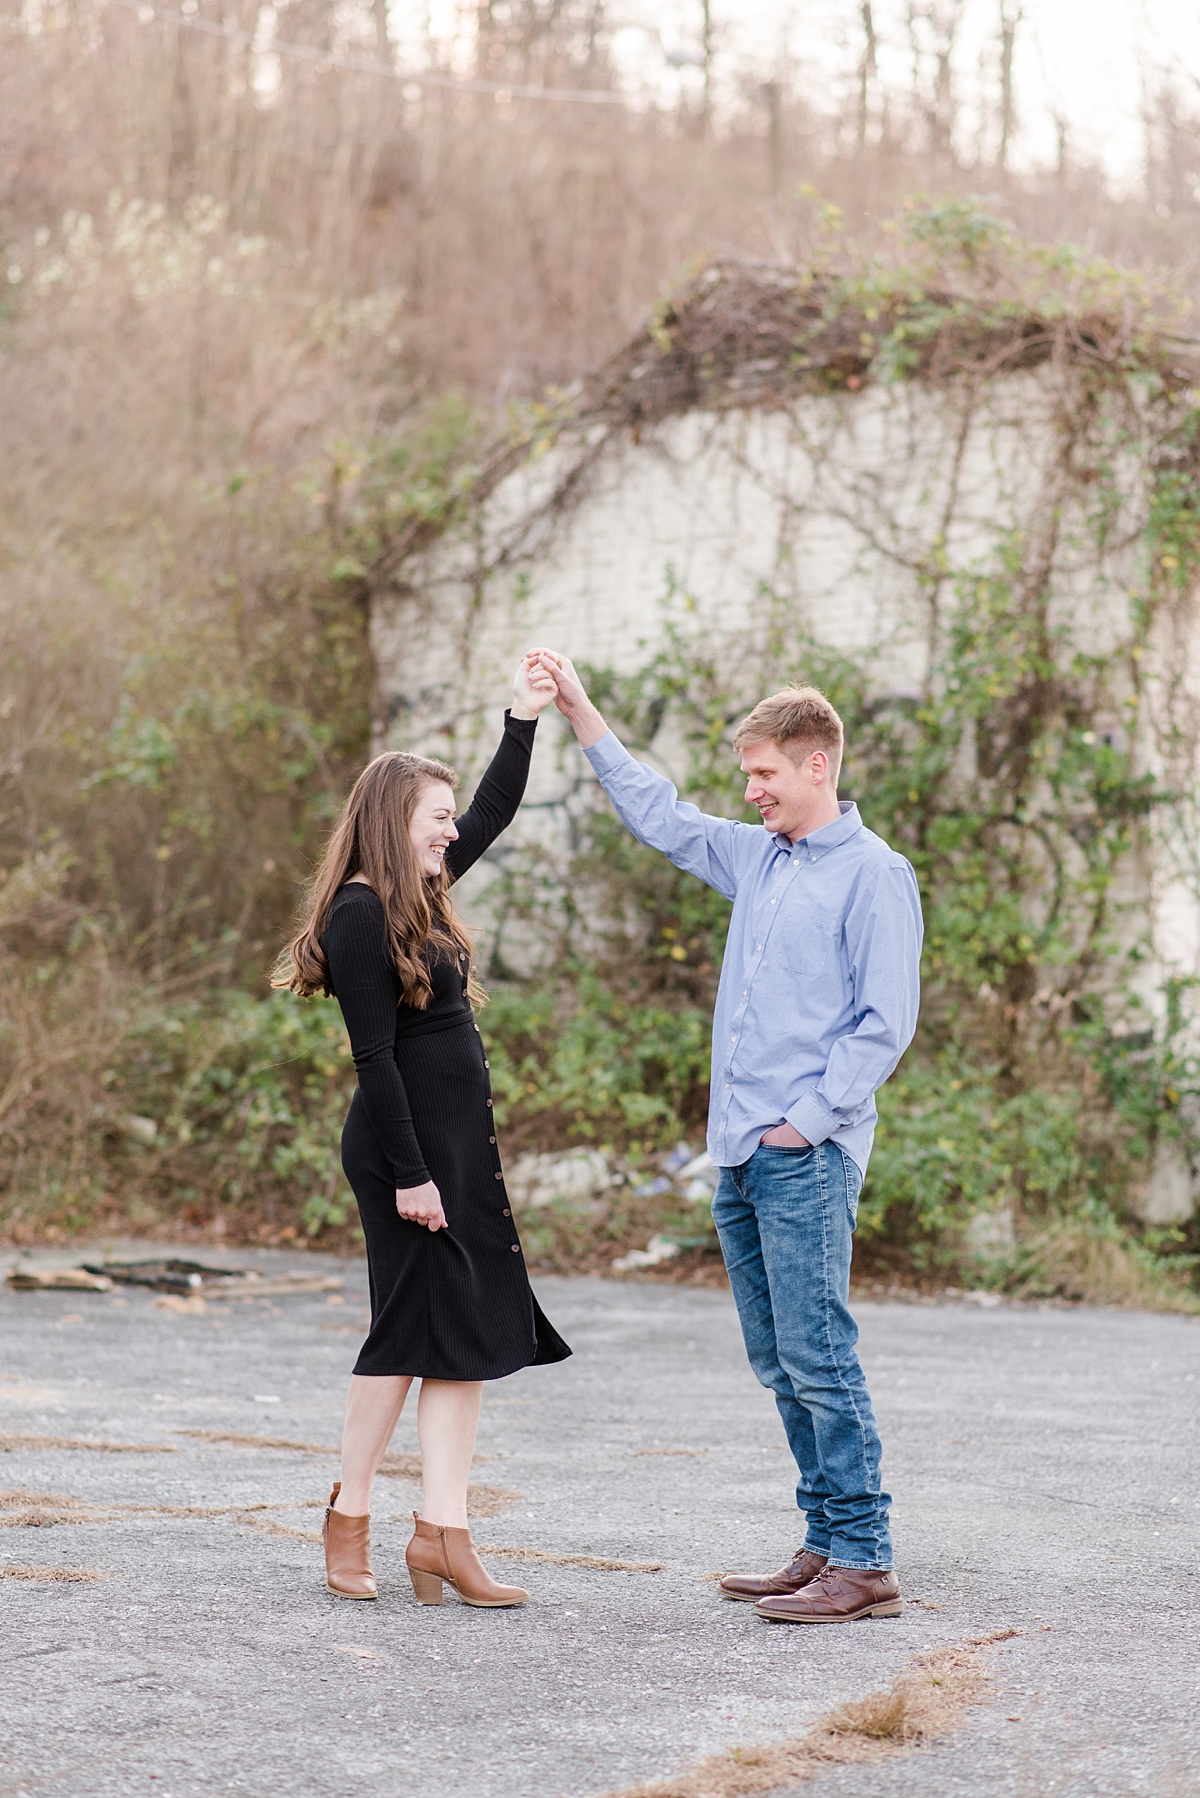 Twirling at Fall Rockfish Gap Overlook Engagement Session. Photography by Richmond Wedding Photographer Kailey Brianne Photography.